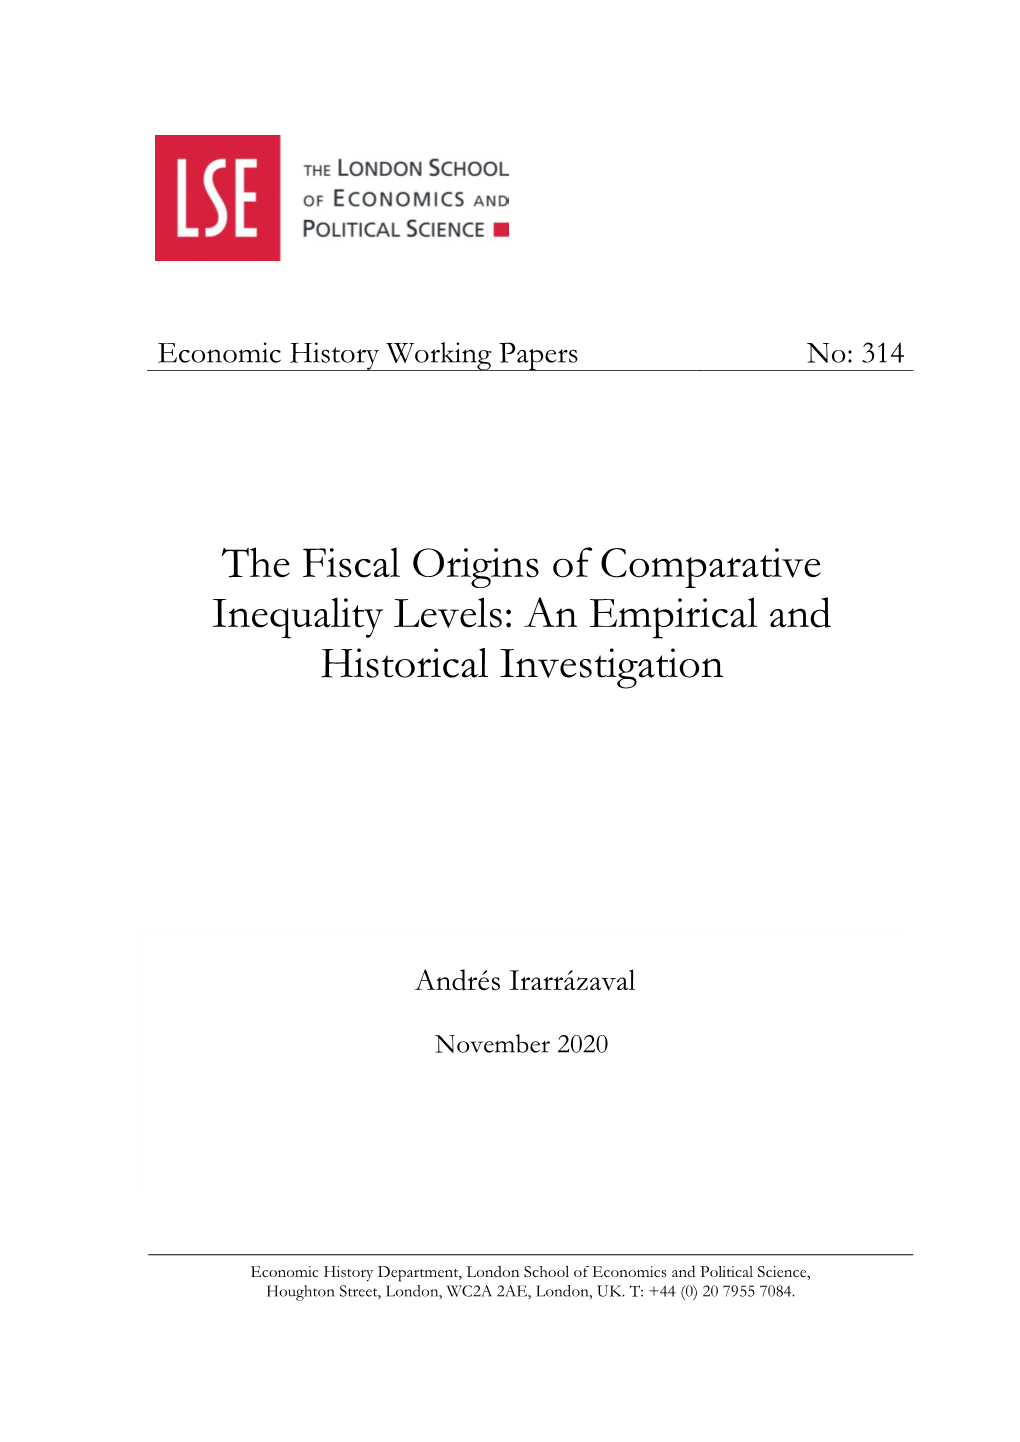 The Fiscal Origins of Comparative Inequality Levels: an Empirical and Historical Investigation Andrés Irarrázaval*